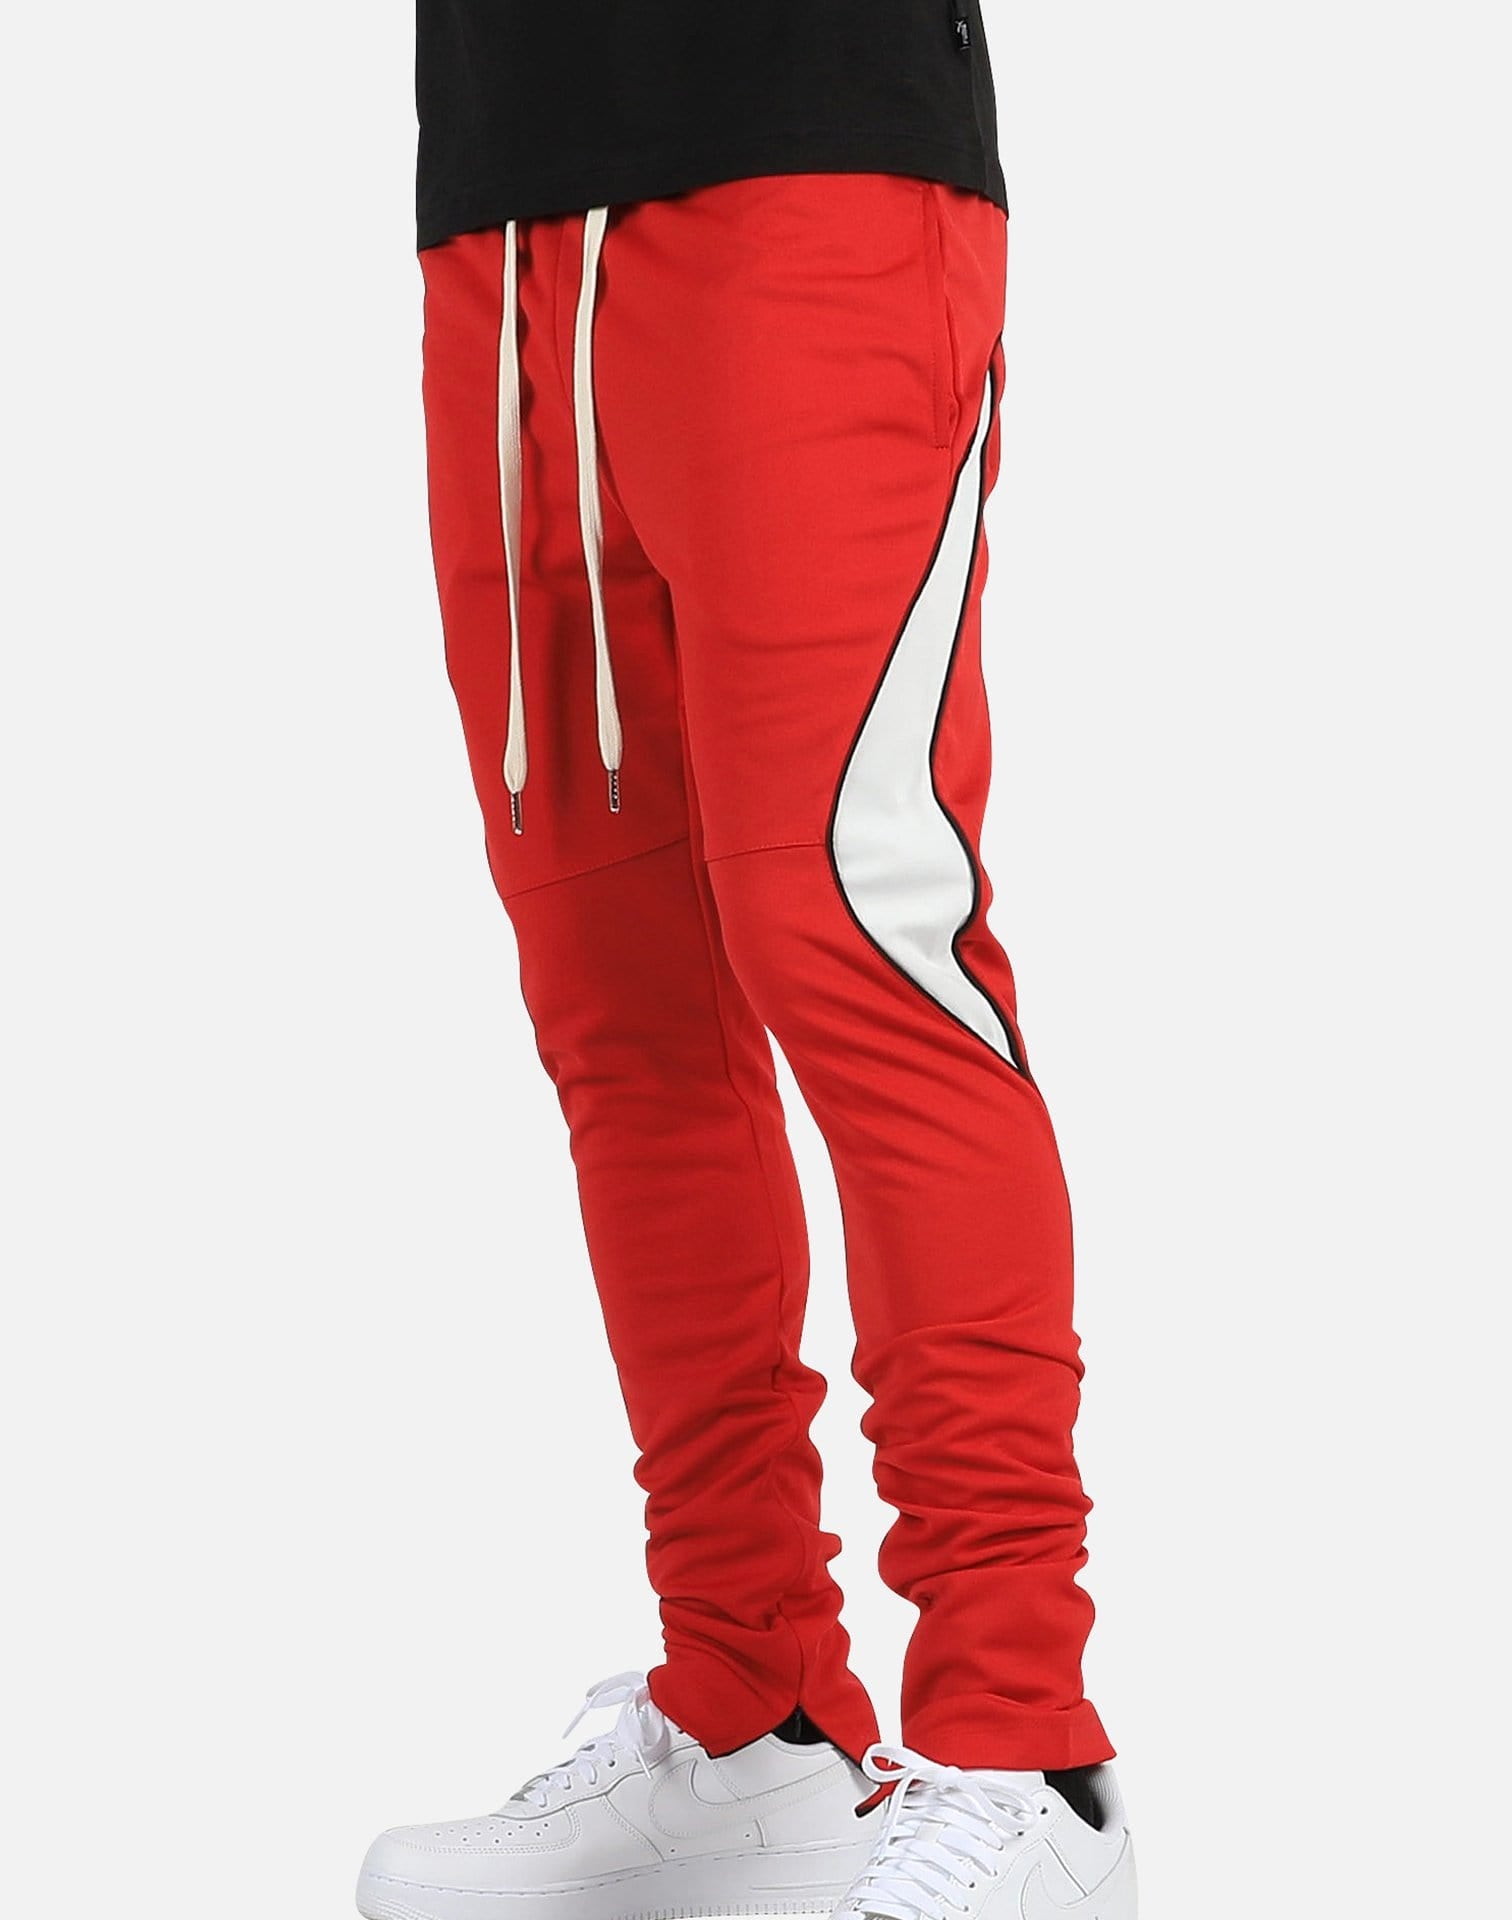 PIPING HALF TRACK PANTS – DTLR